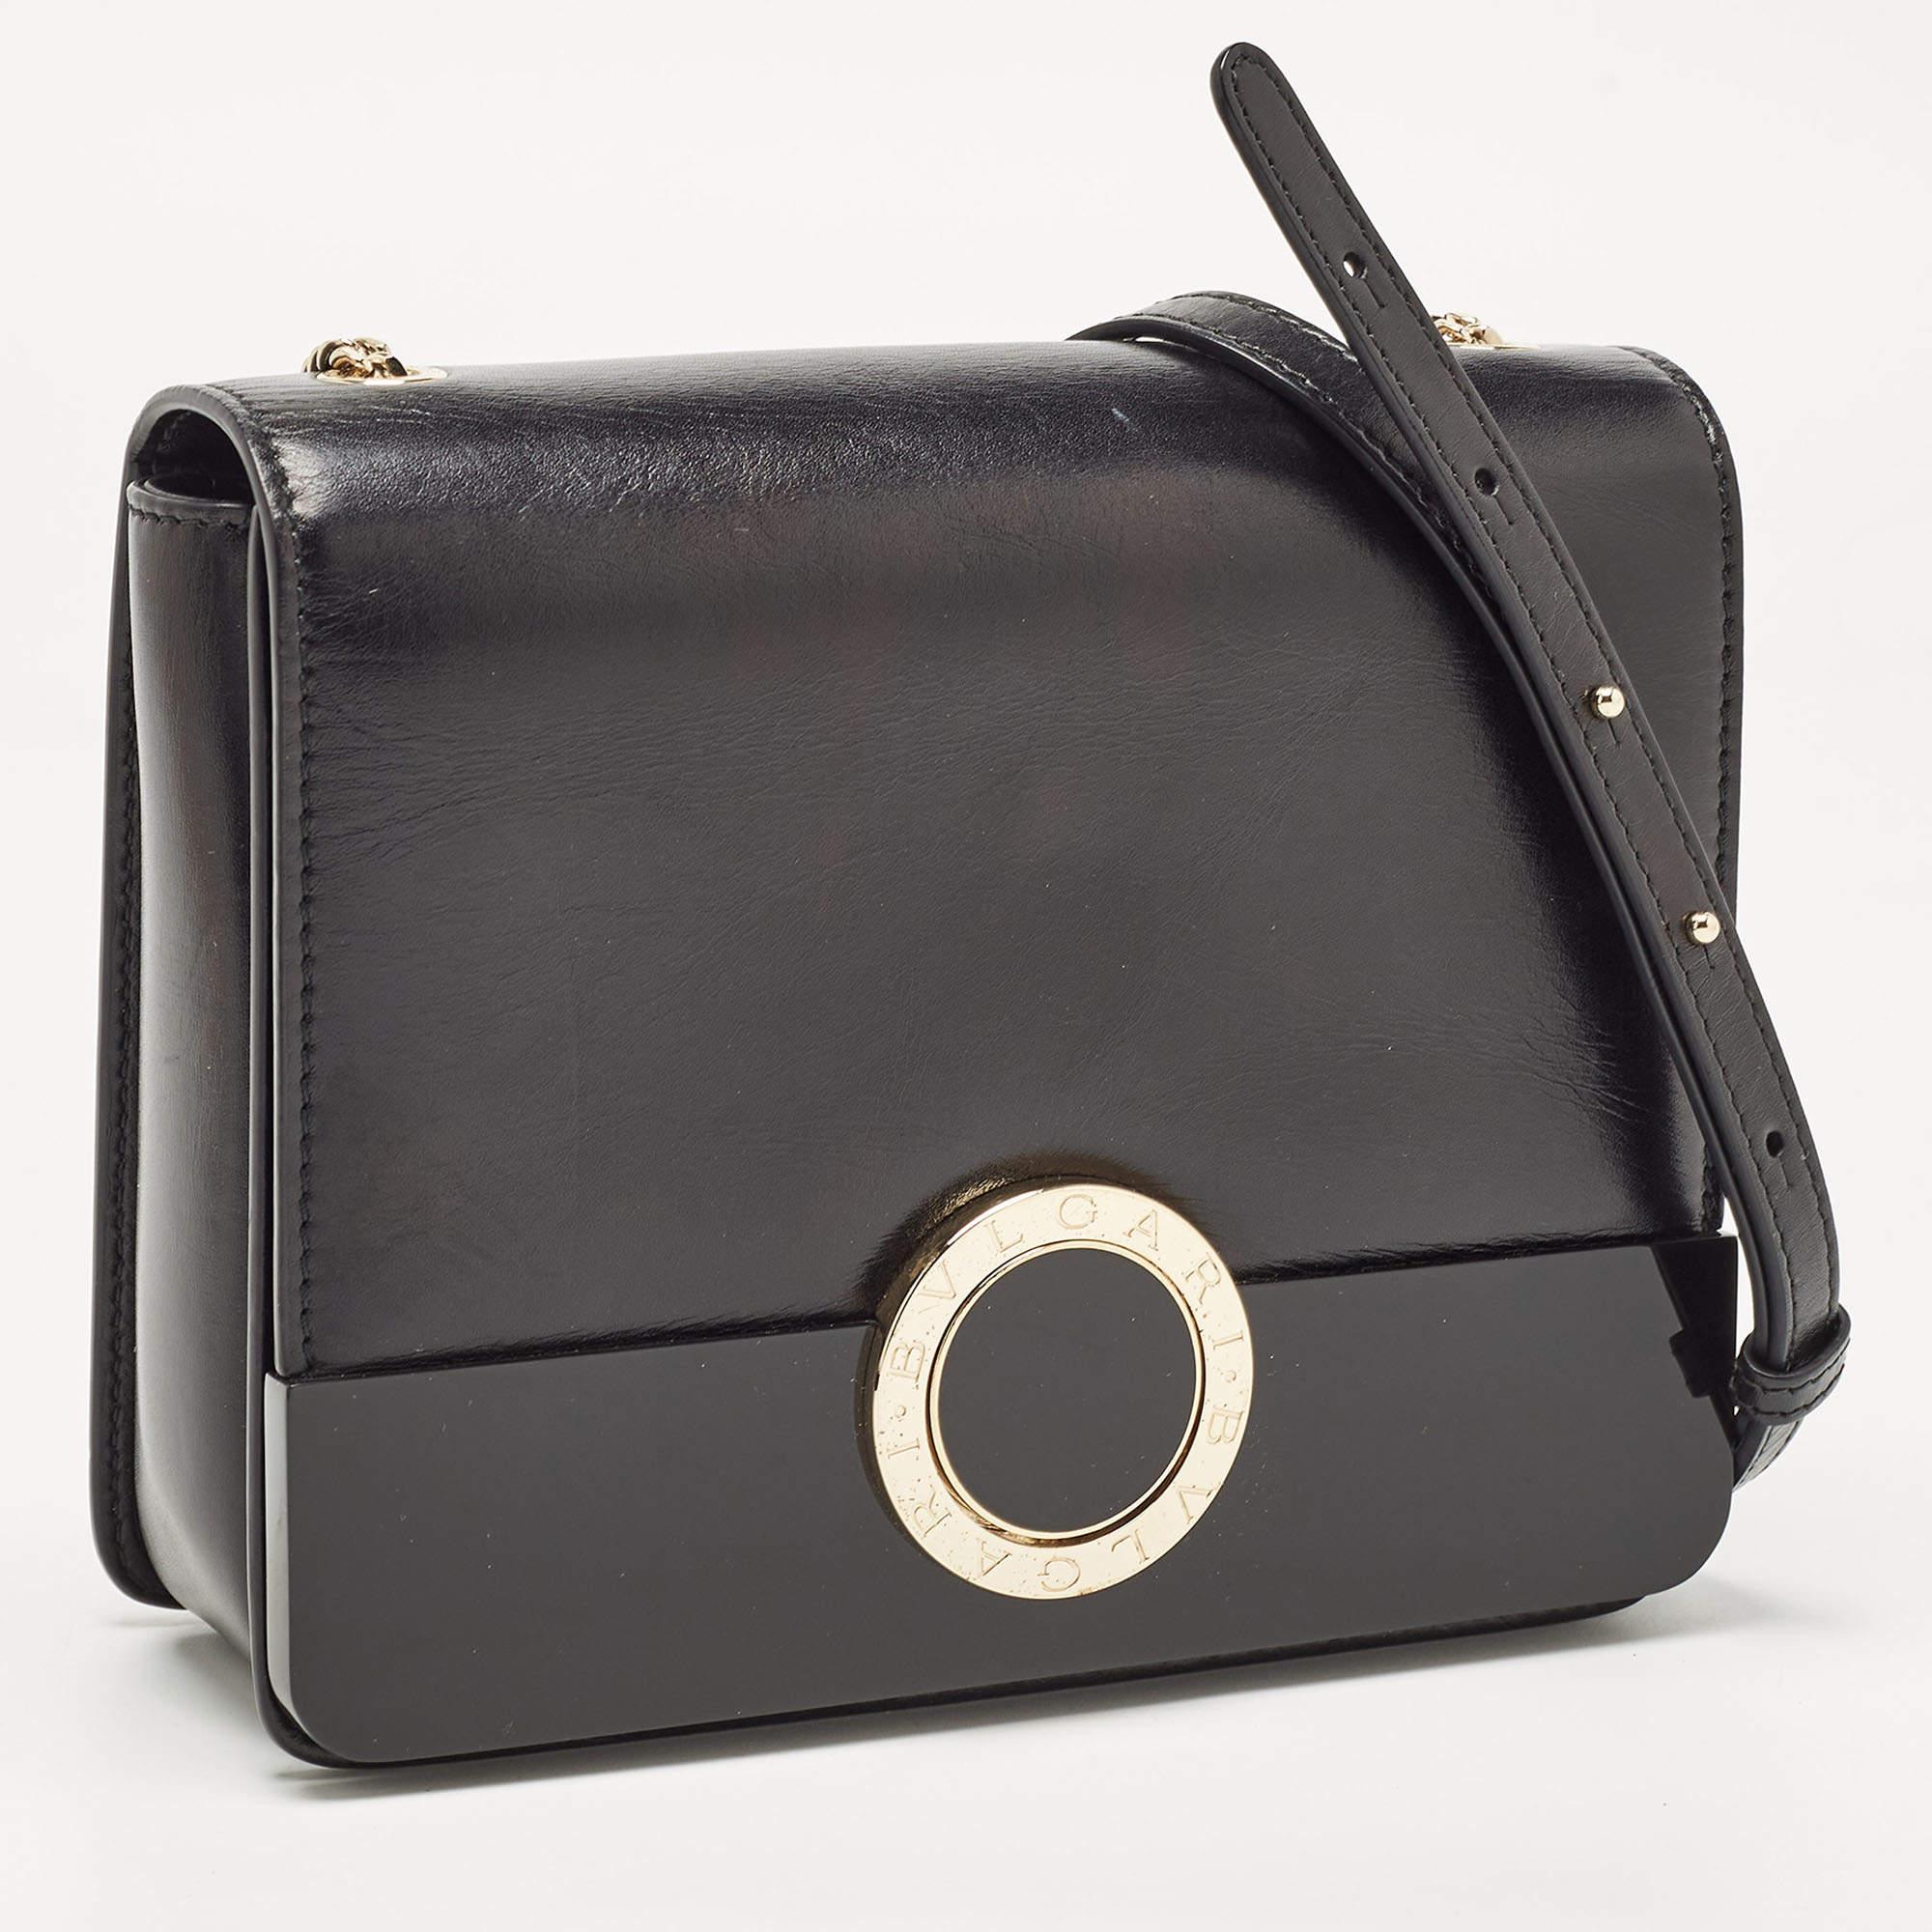 We bring you your best buy of the year in the form of this elegant and charming shoulder bag from the house of Bvlgari. Crafted with precision from leather and perspex, it is covered in shades of black. It has a structured silhouette with a full